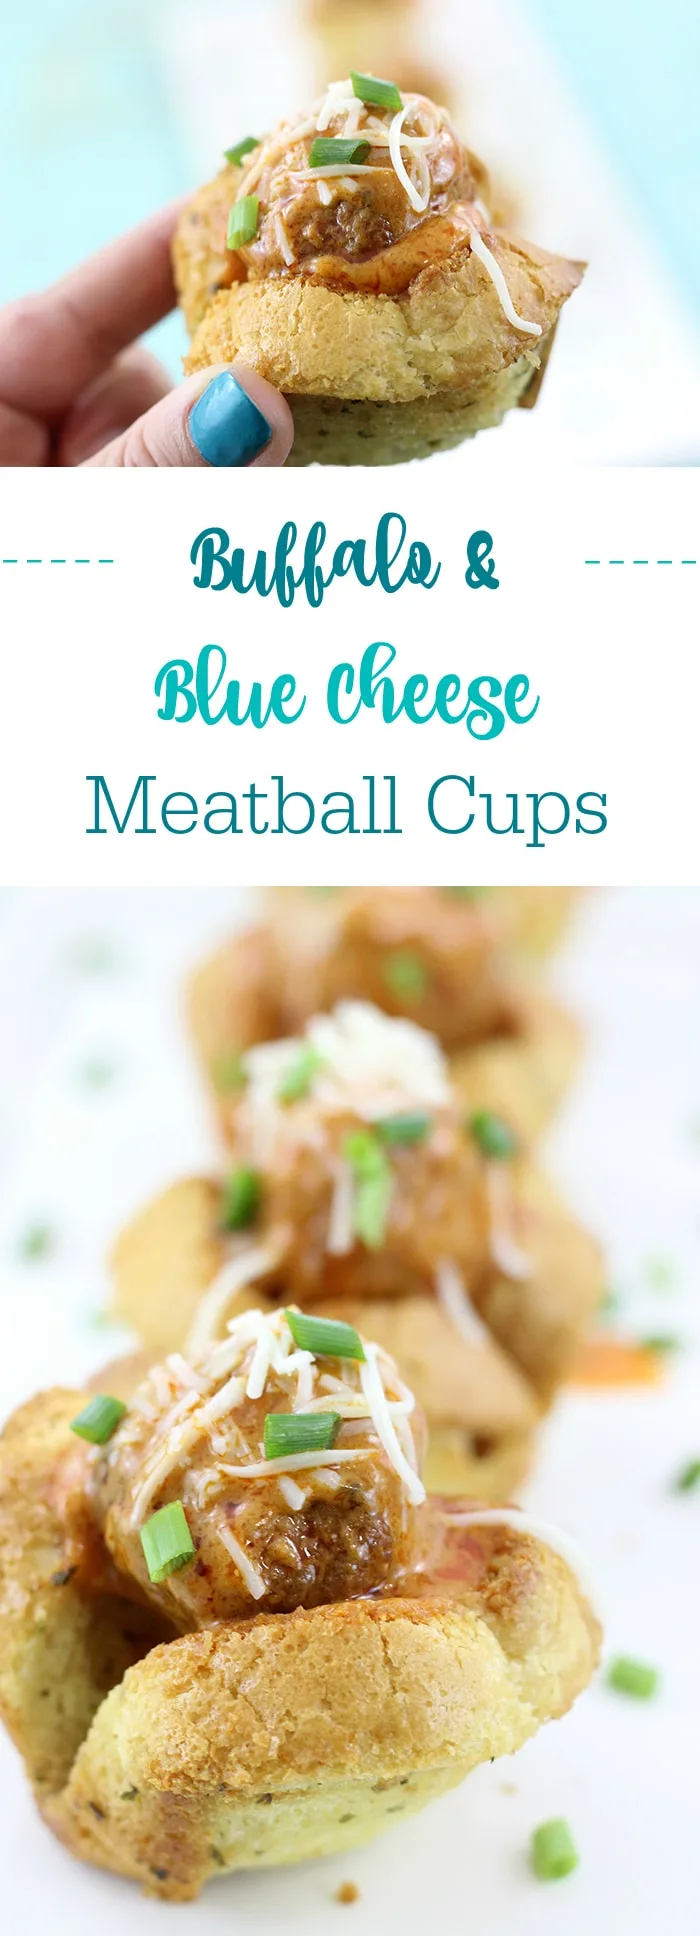 Click the image now to get this Buffalo Blue Cheese Meatball Cups Made in the Slow Cooker now.